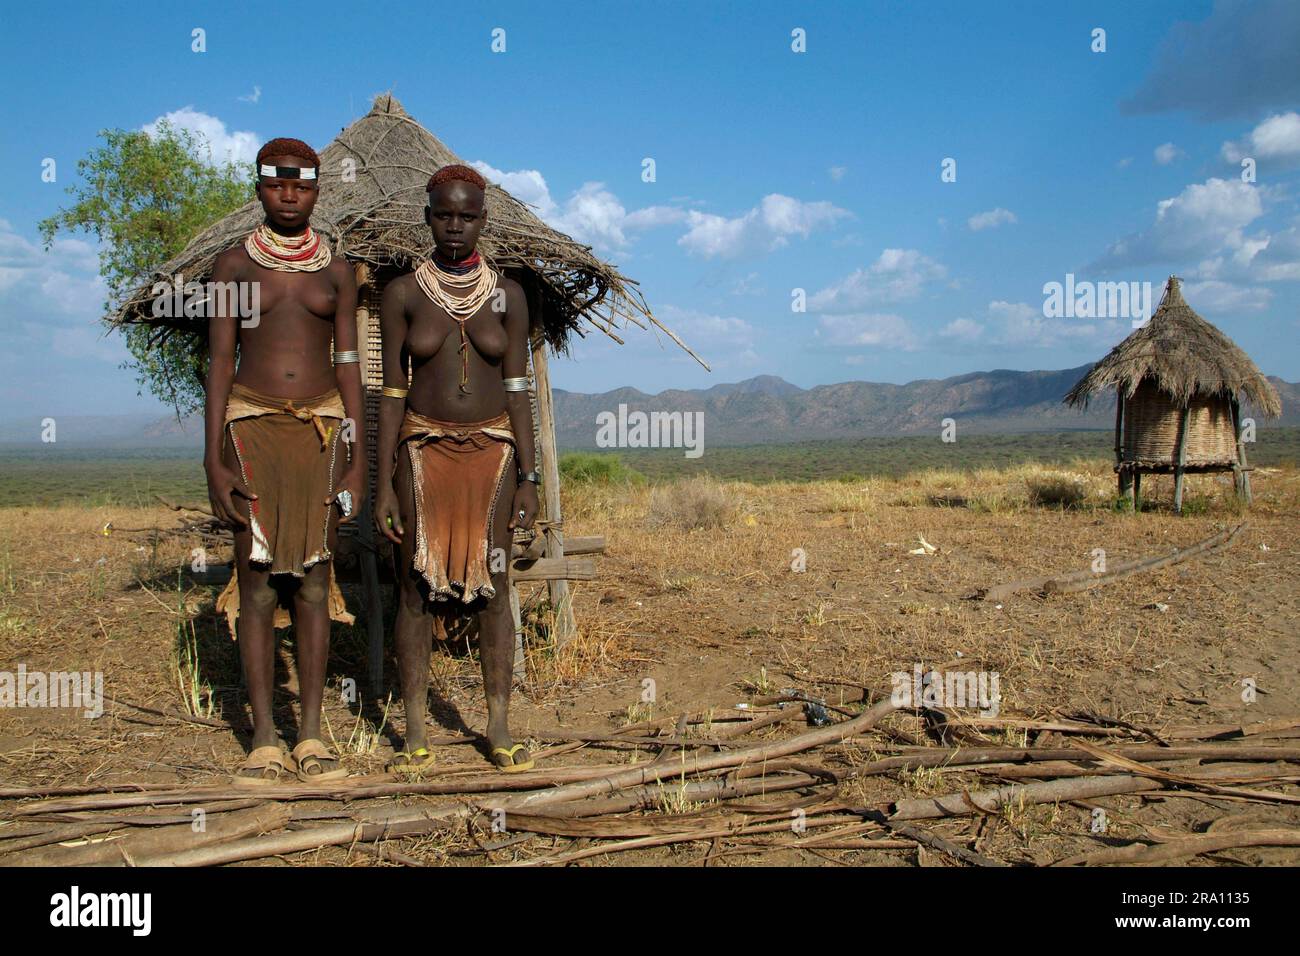 Girl in front of granary, Karo tribe, southern Ethiopia Stock Photo